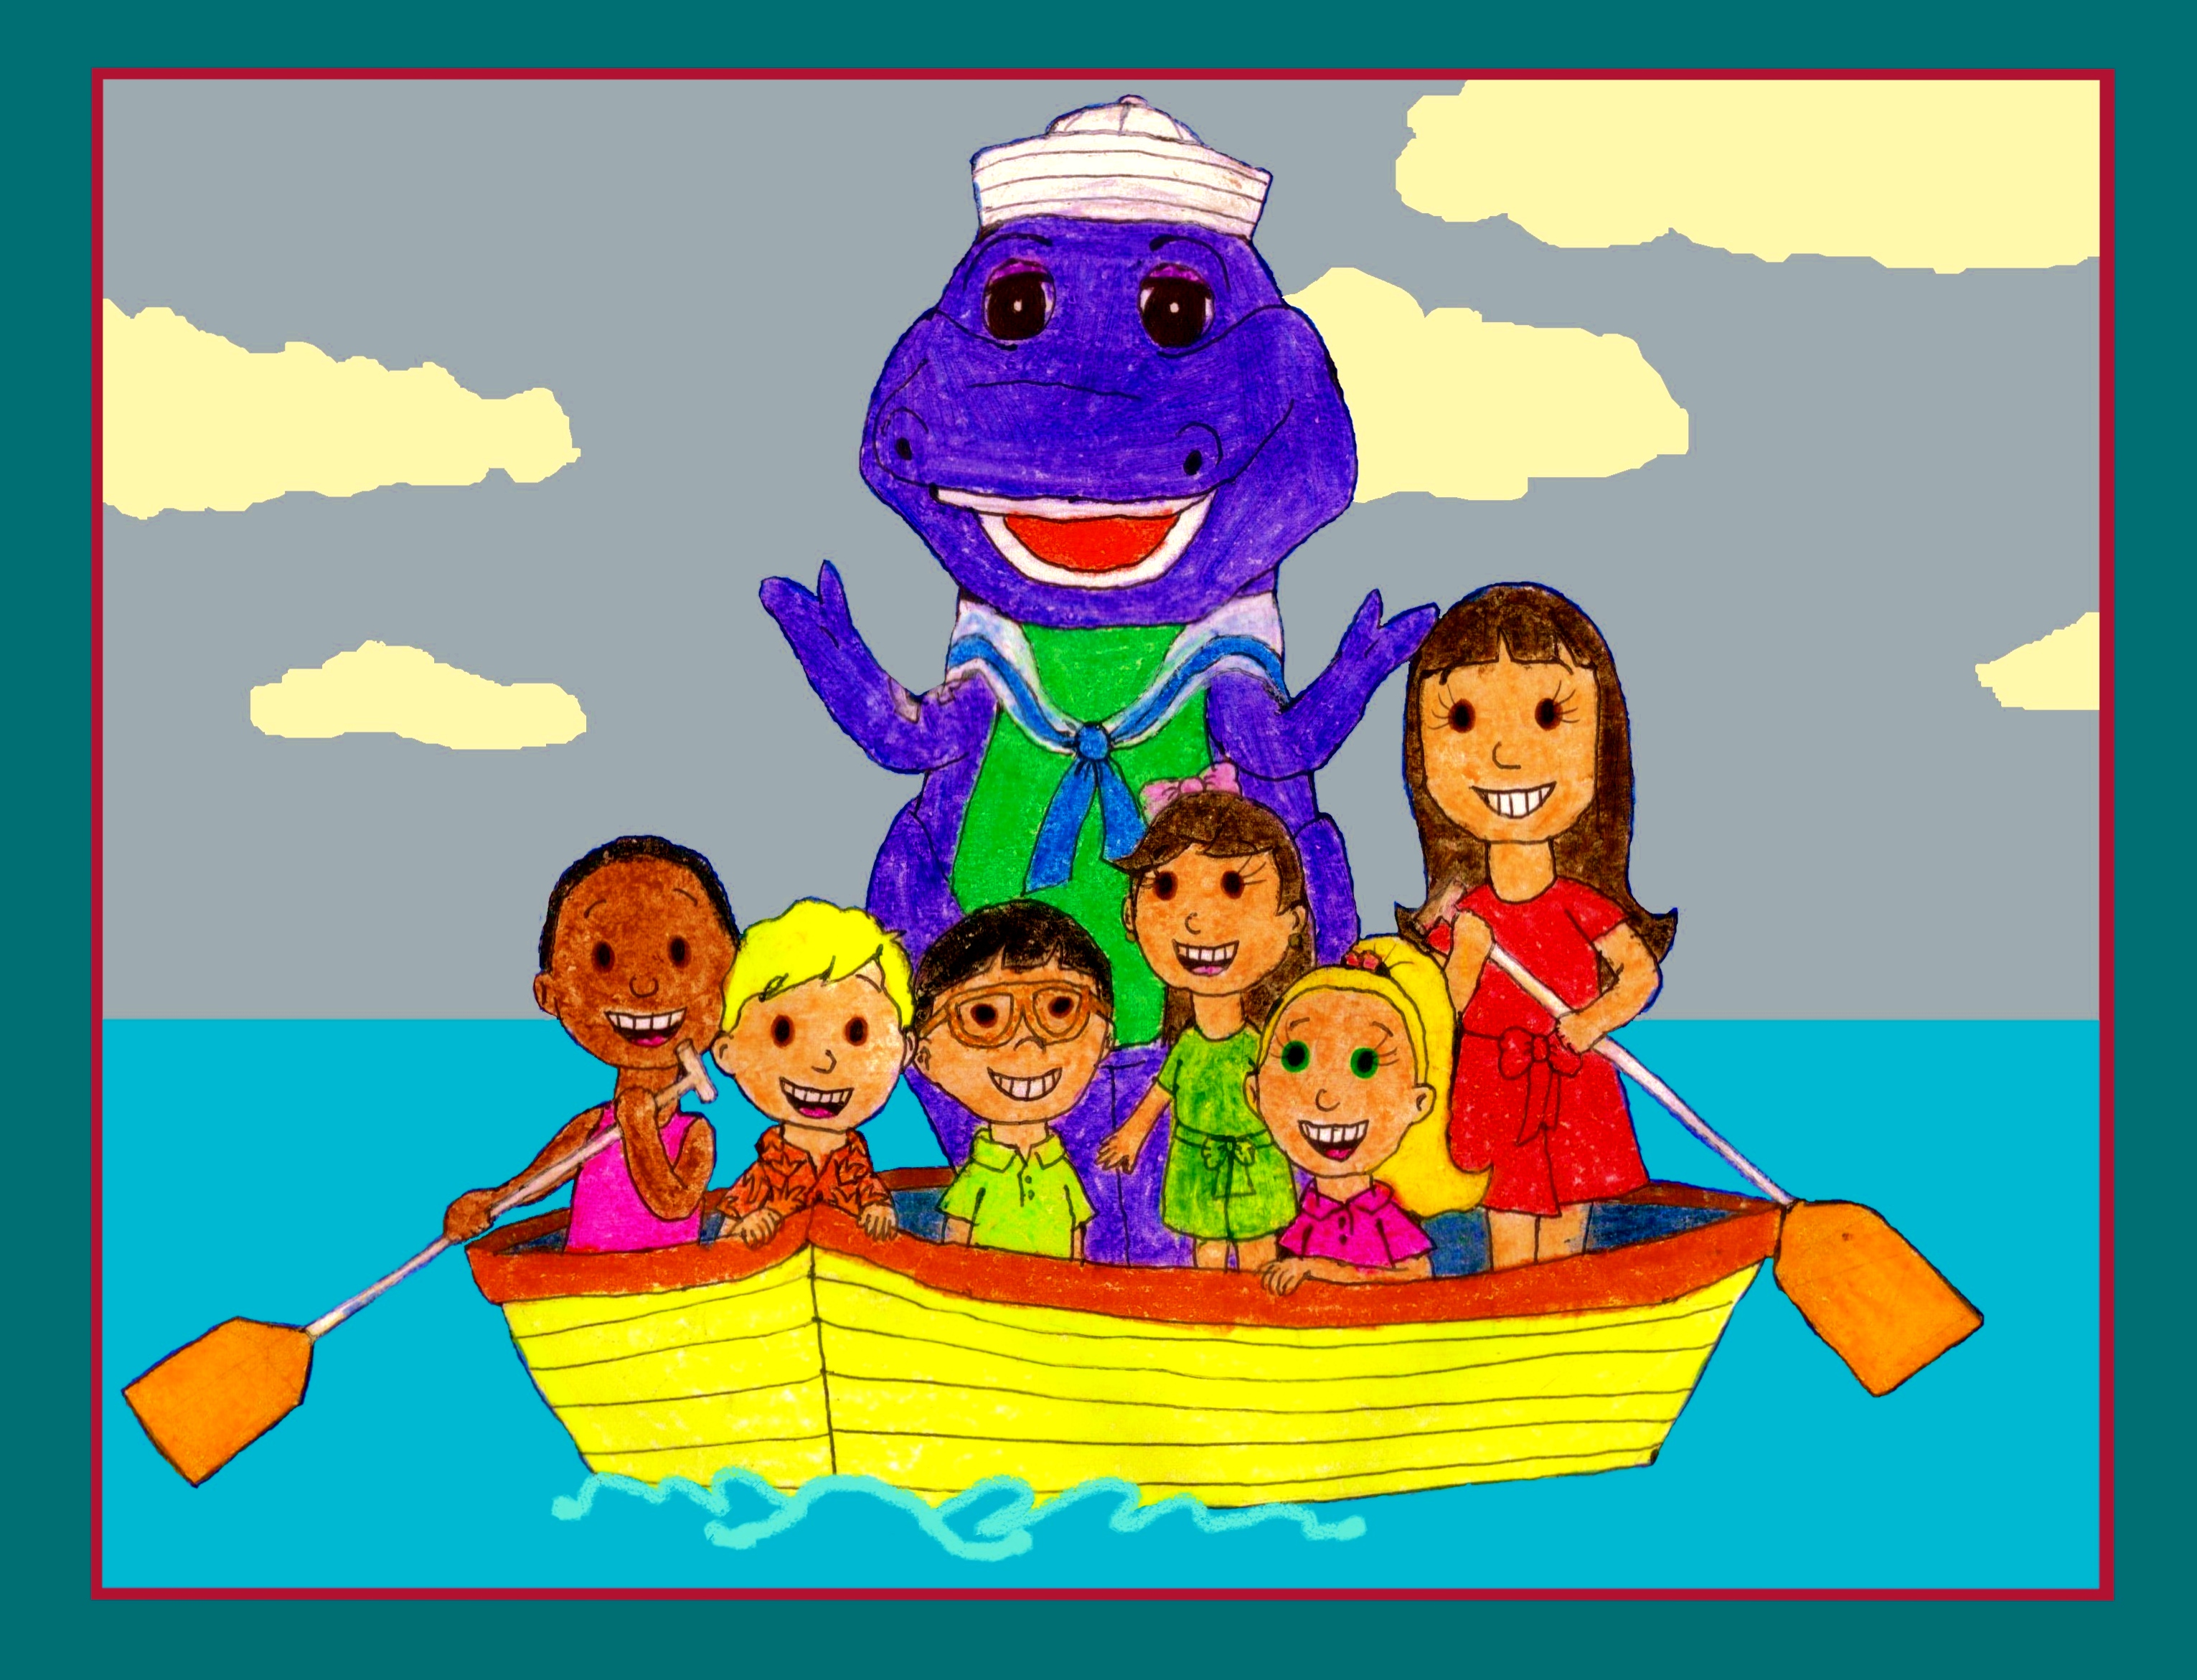 Sailing With Barney And The Backyard Gang By BestBarneyFan On